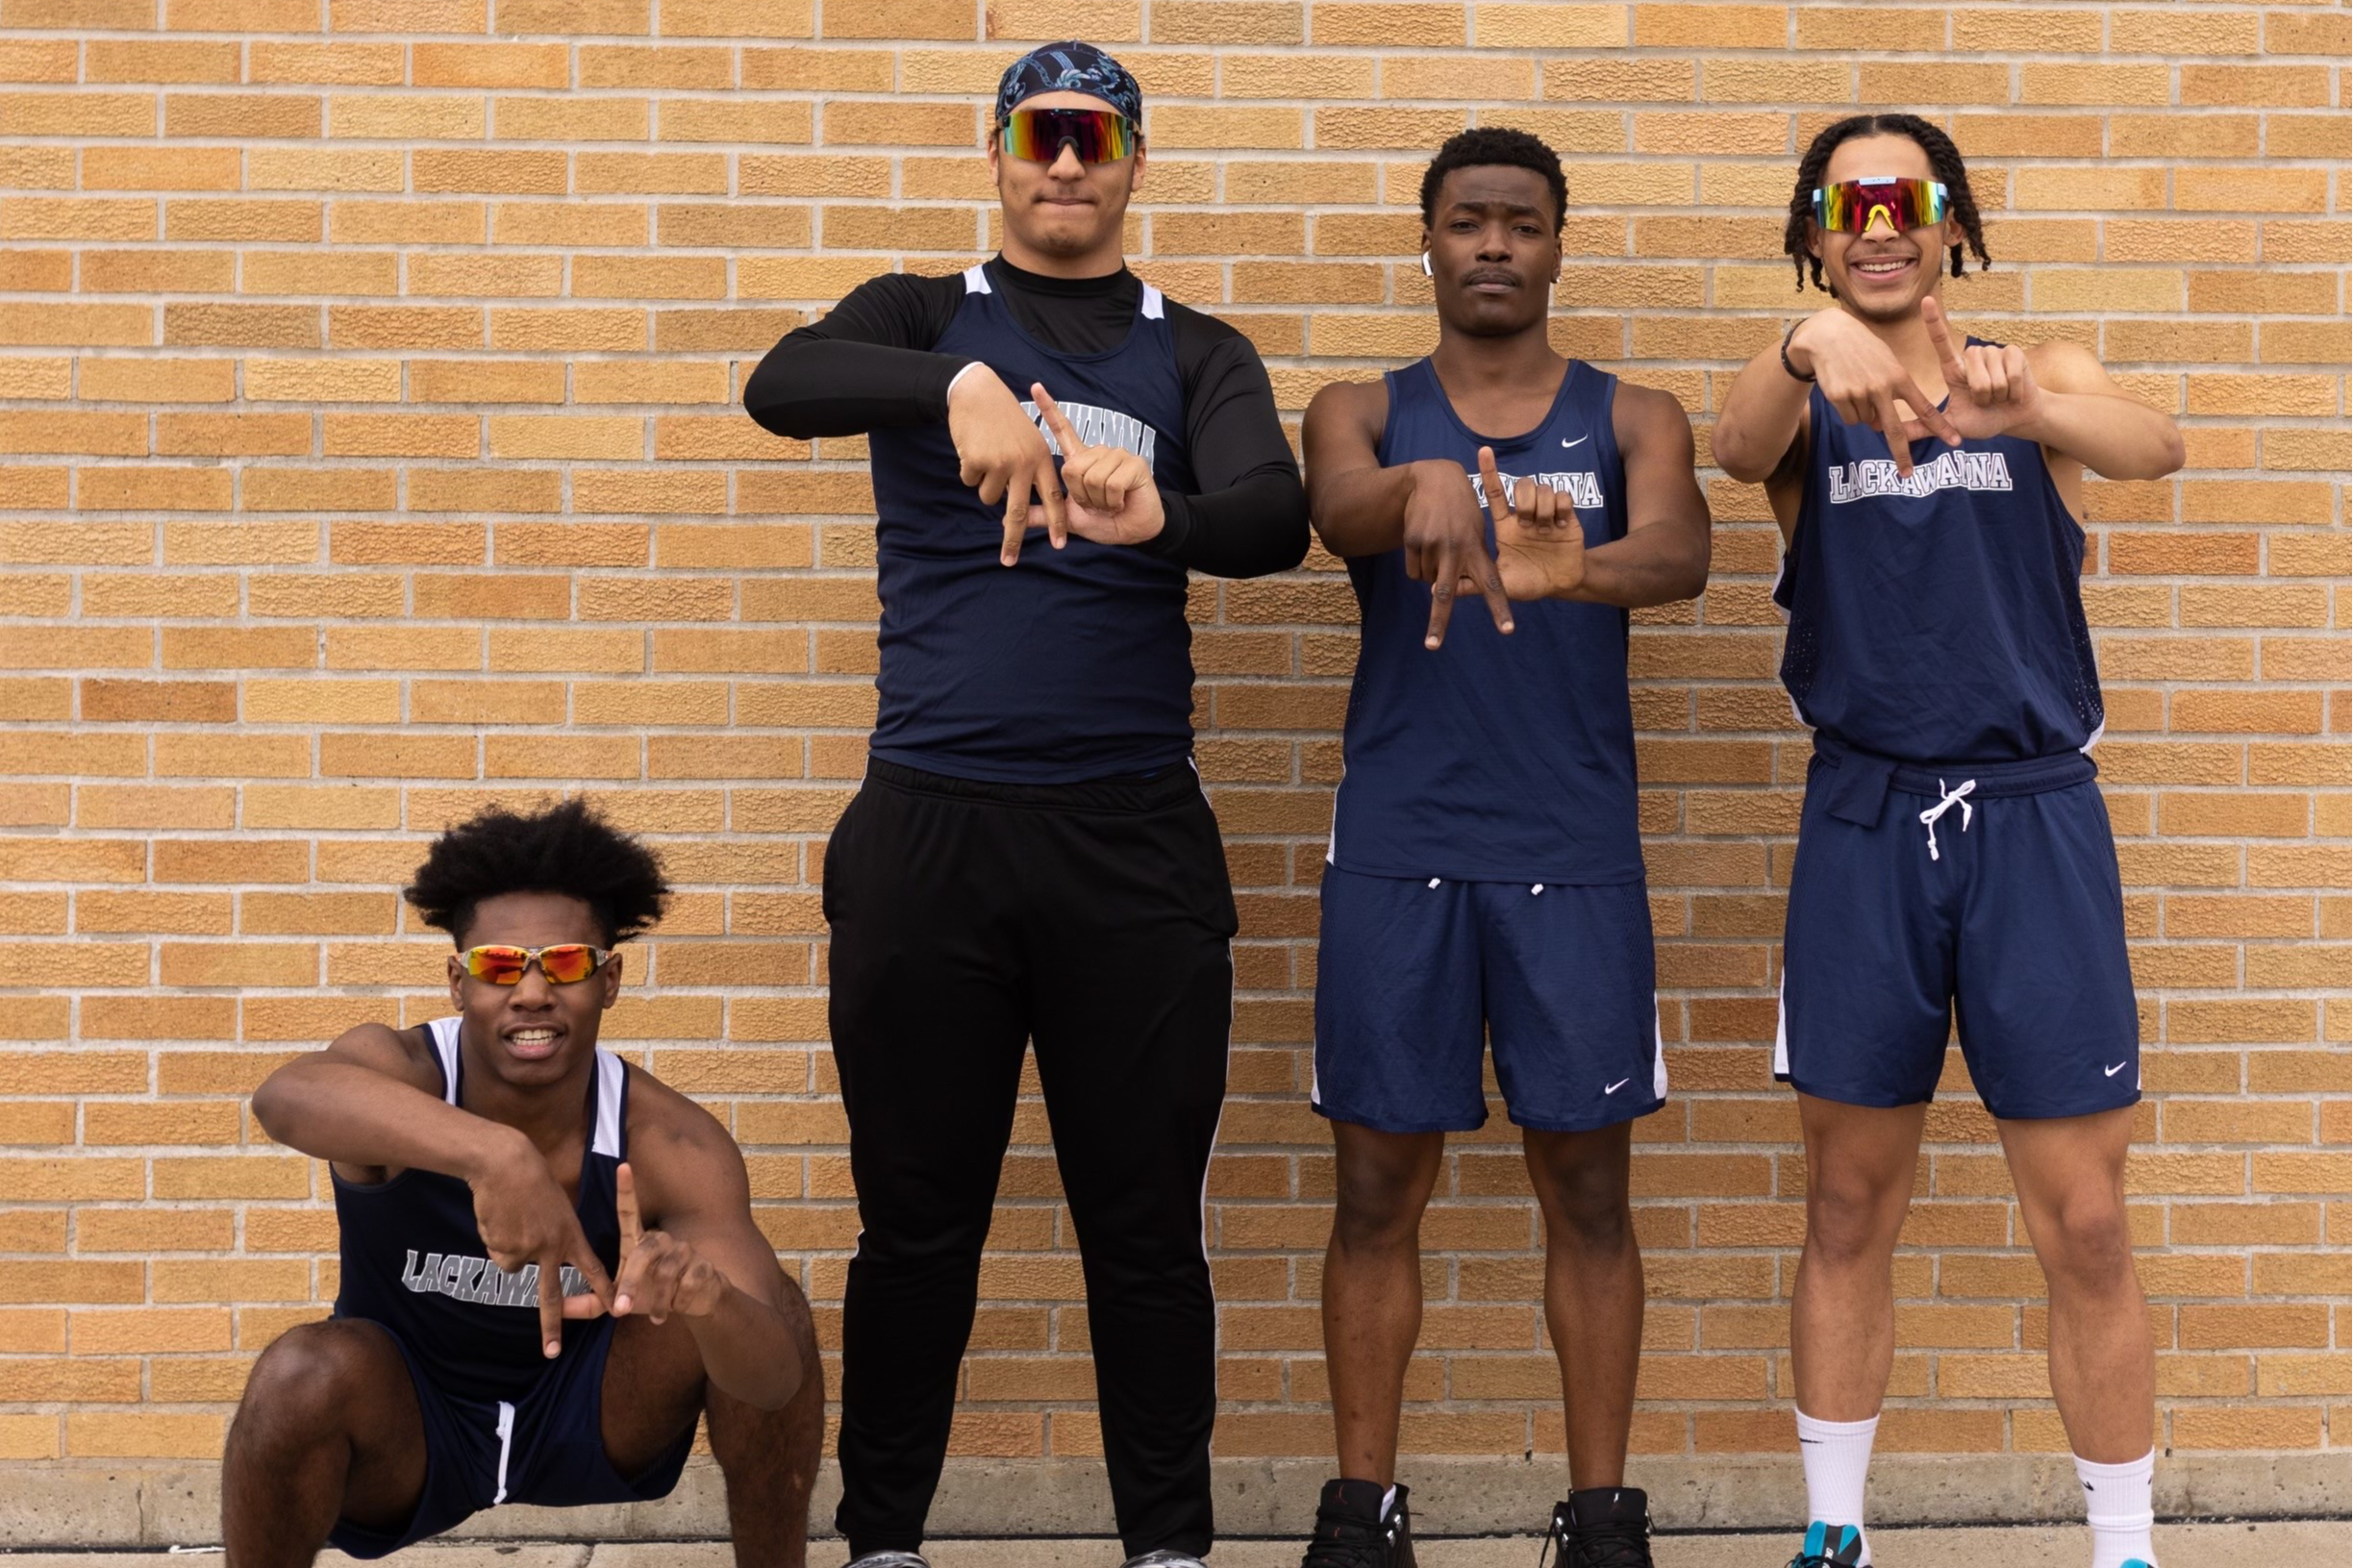 Lackawanna track athletes pose for a photo